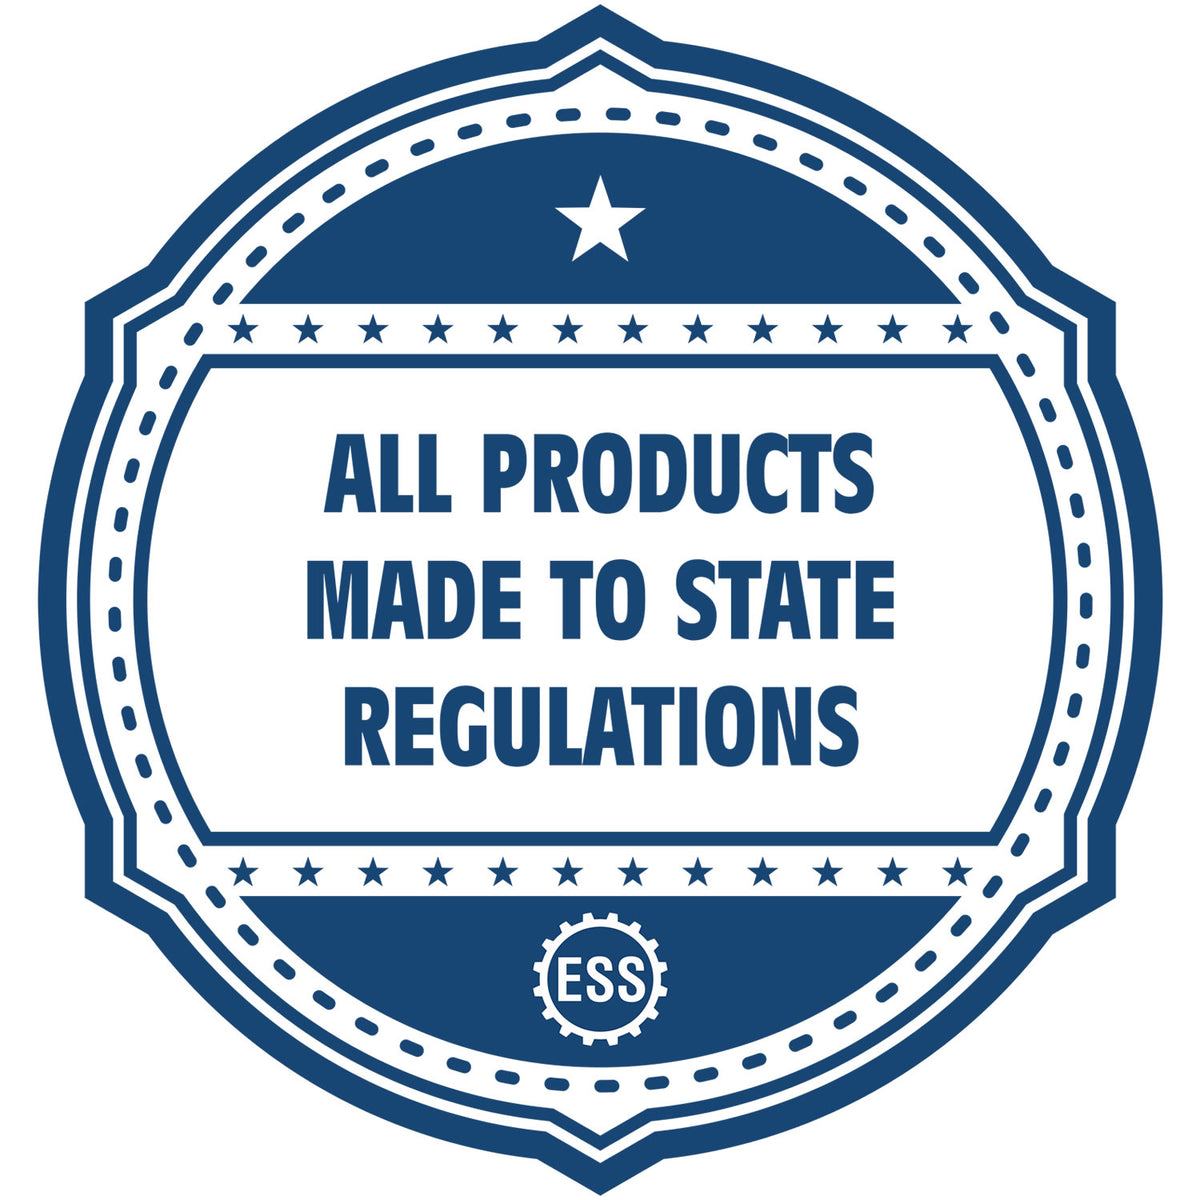 An icon or badge element for the Handheld California Professional Engineer Embosser showing that this product is made in compliance with state regulations.